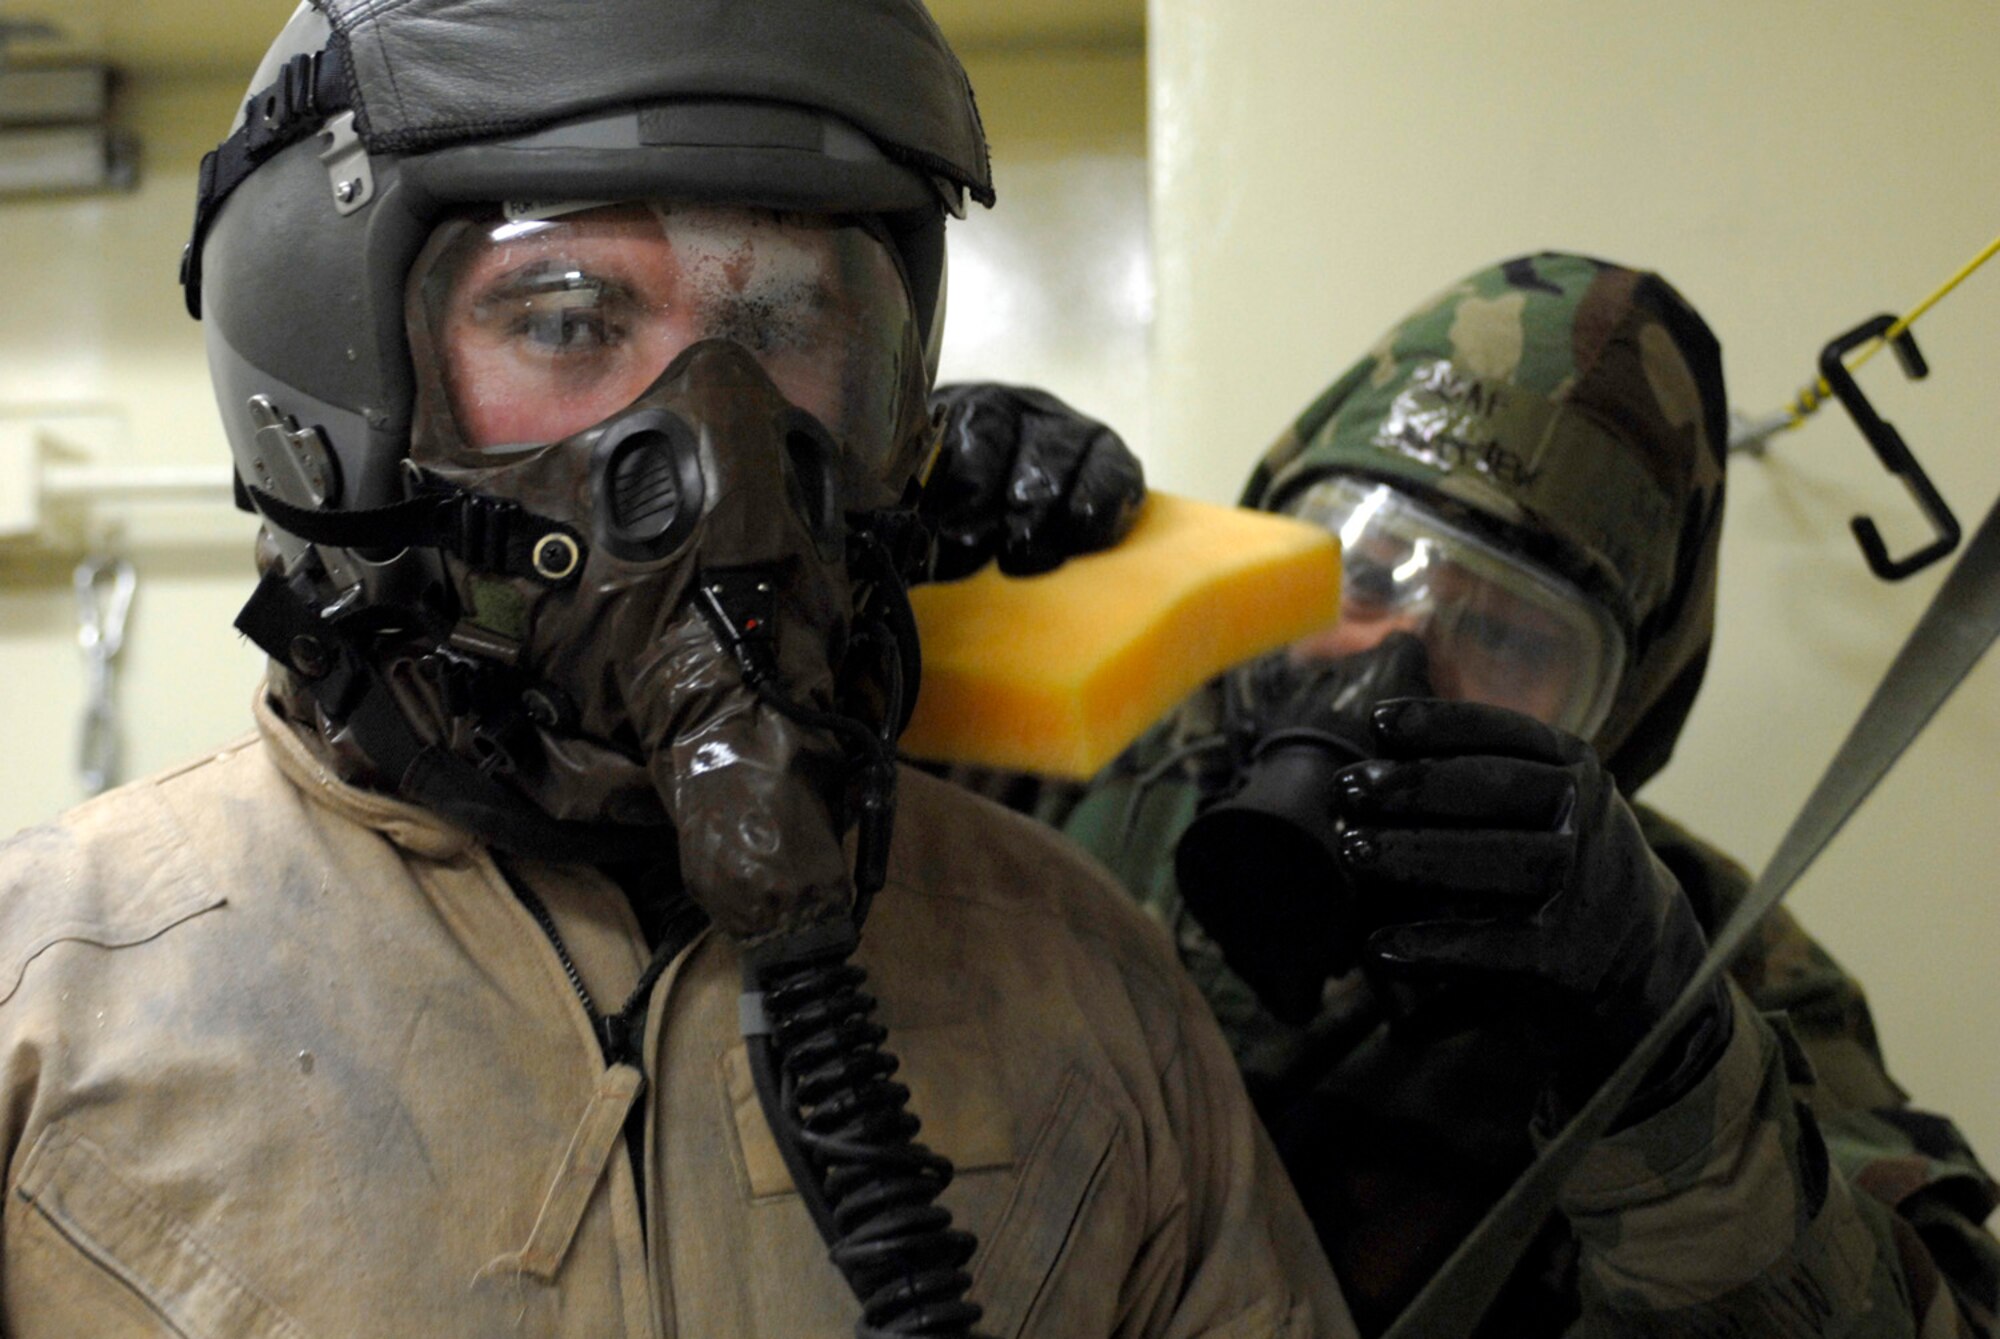 KUNSAN AB, Republic of Korea ? 1st Lt. Nathan Froh, 35th Fighter Squadron pilot, waits as Senior Airman Matthew Vincent, 80th Fighter Squadron washes off his gas mask during the pilot?s decontamination here. The 8th Fighter Wing is currently undergoing an operational readiness inspection to test its ability to conduct its wartime mission. (U.S. Air Force photo by Senior Airman Darnell T. Cannady)